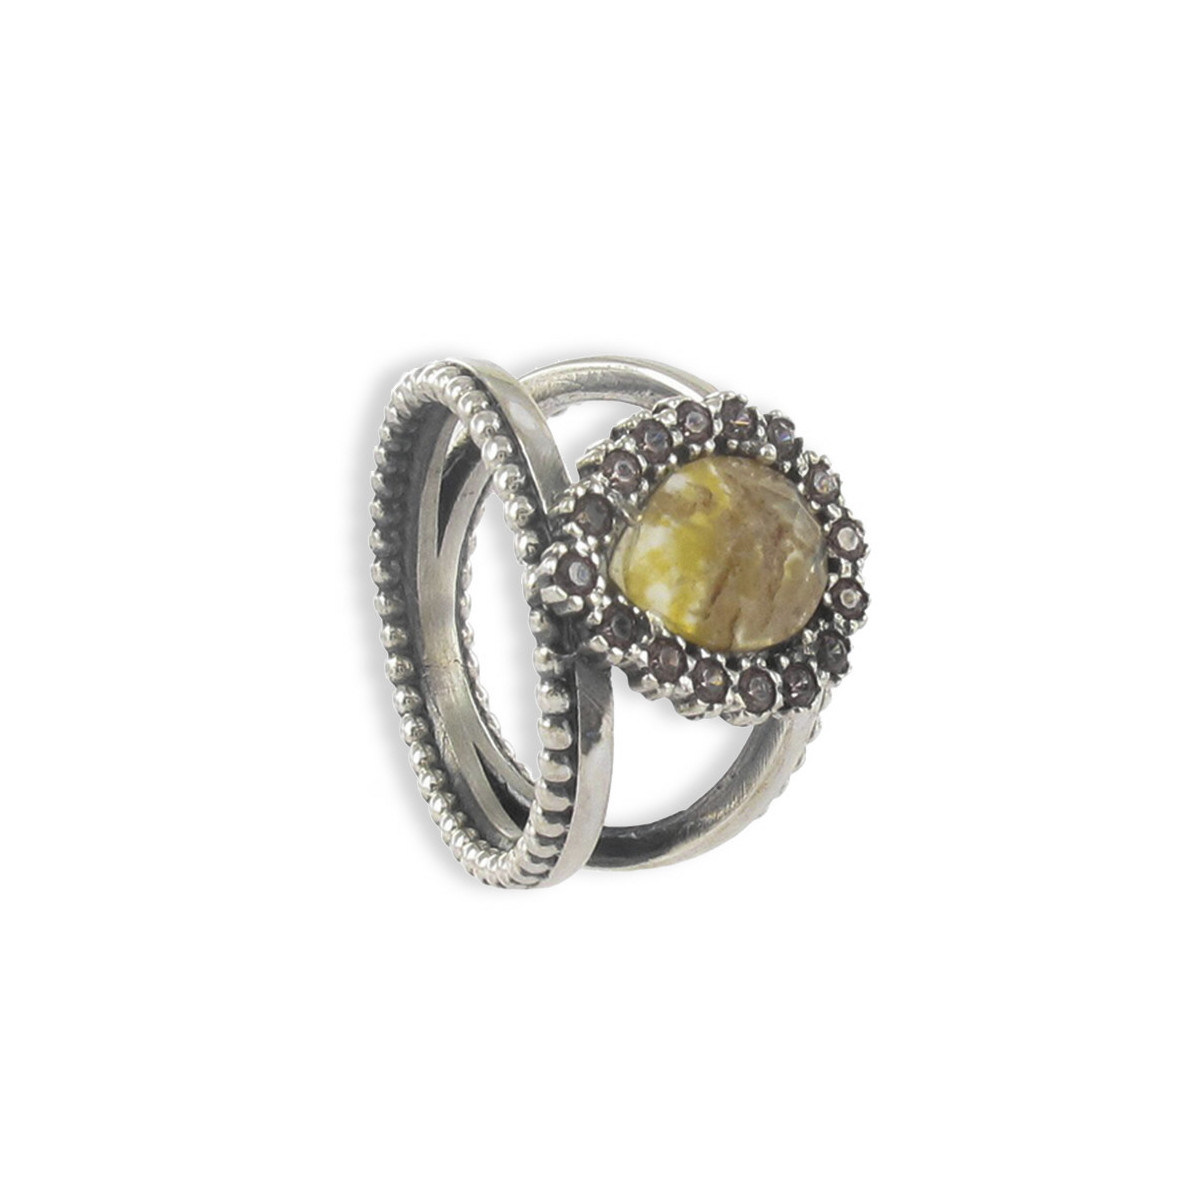 VOLUME SILVER RING WITH BIG STONE